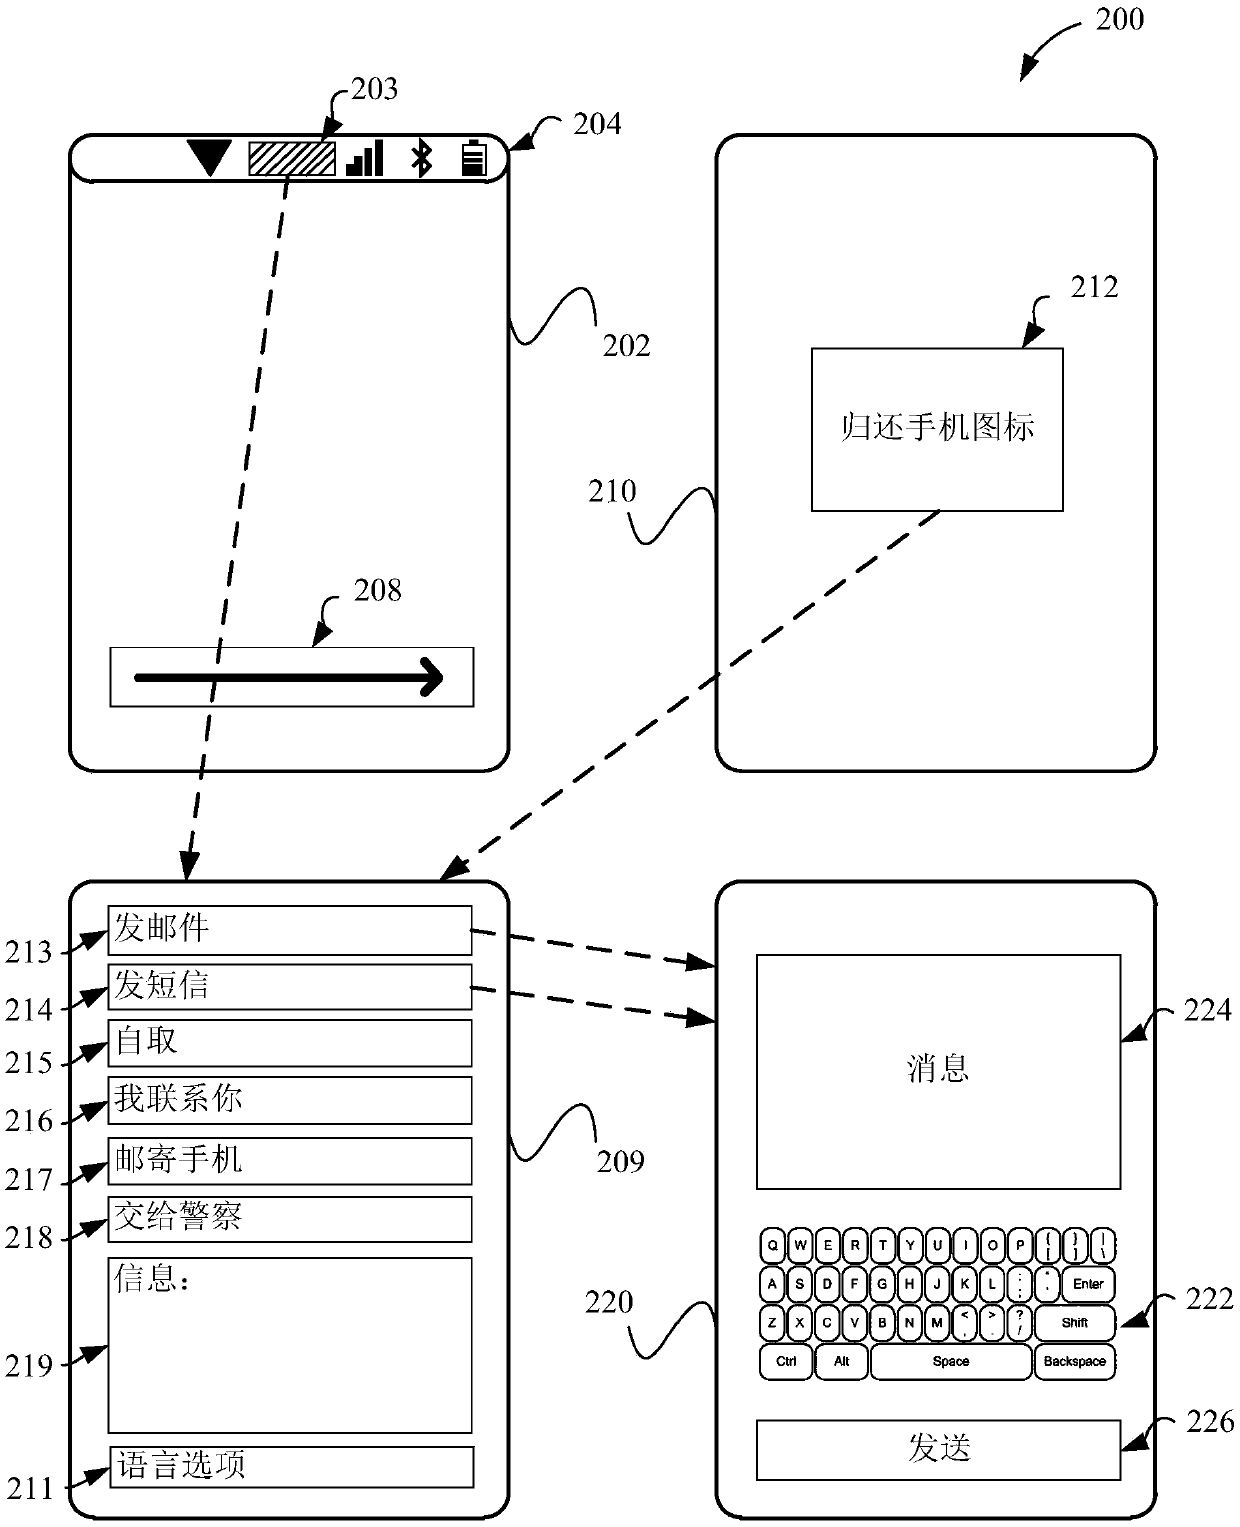 Apparatus and method for facilitating return of mobile device